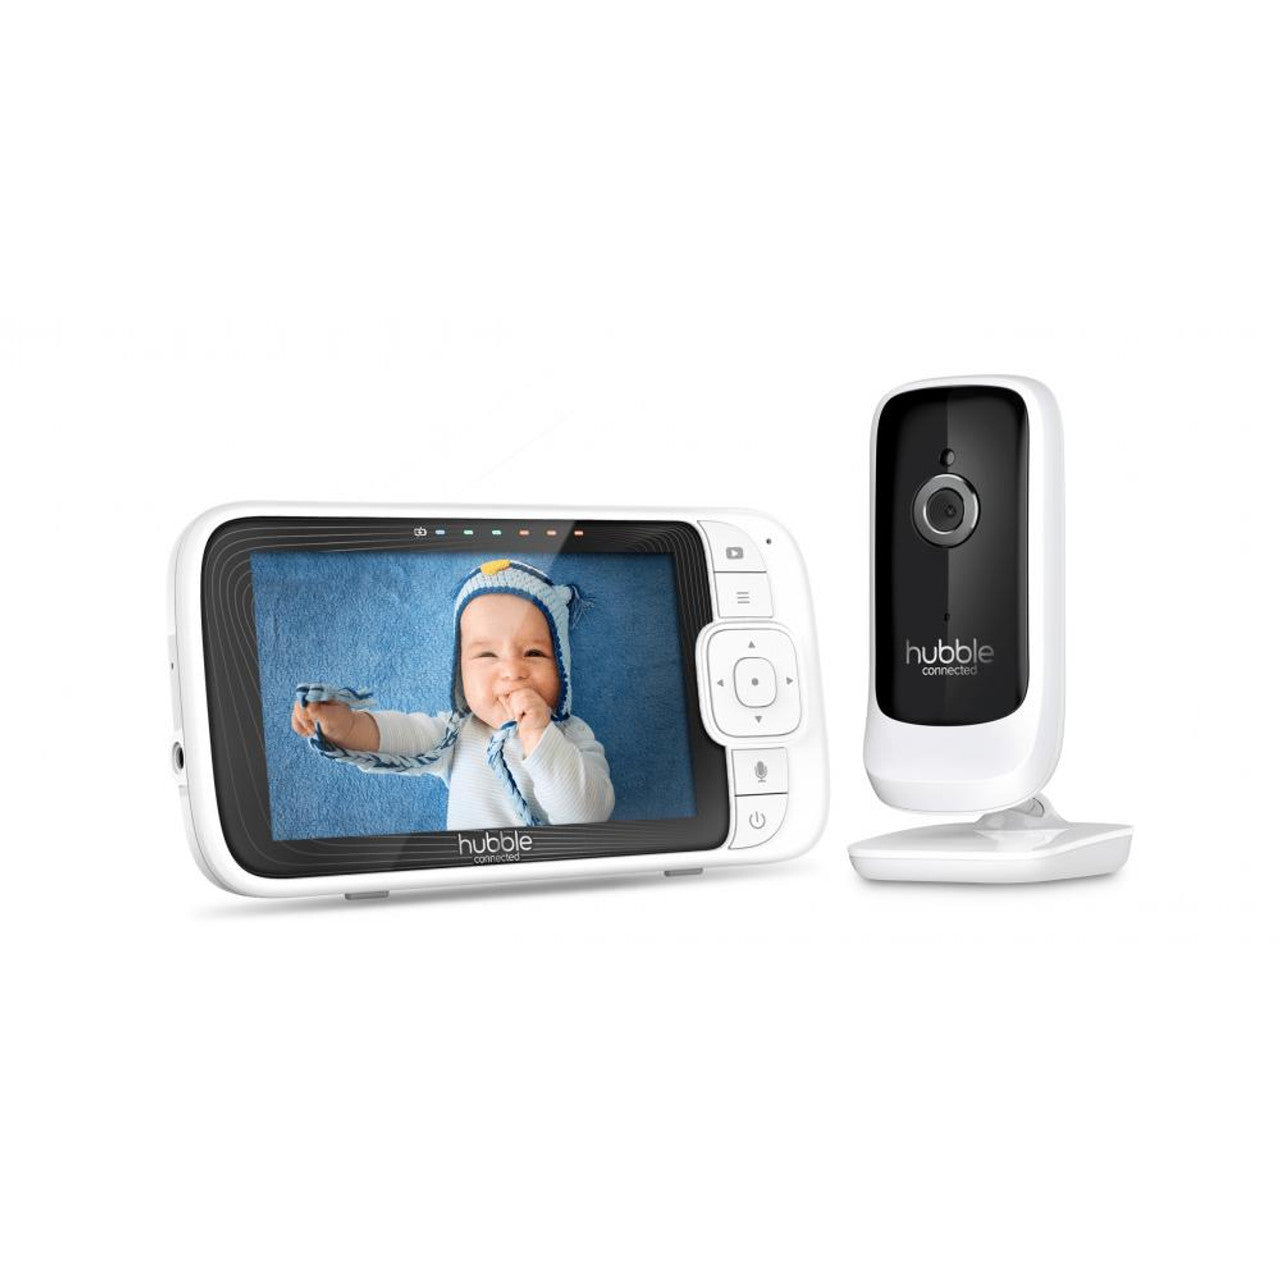 Hubble Nursery Pal Link Premium 5" Smart Video Baby Monitor - White & Black | 5012786049178 from Hubble - DID Electrical